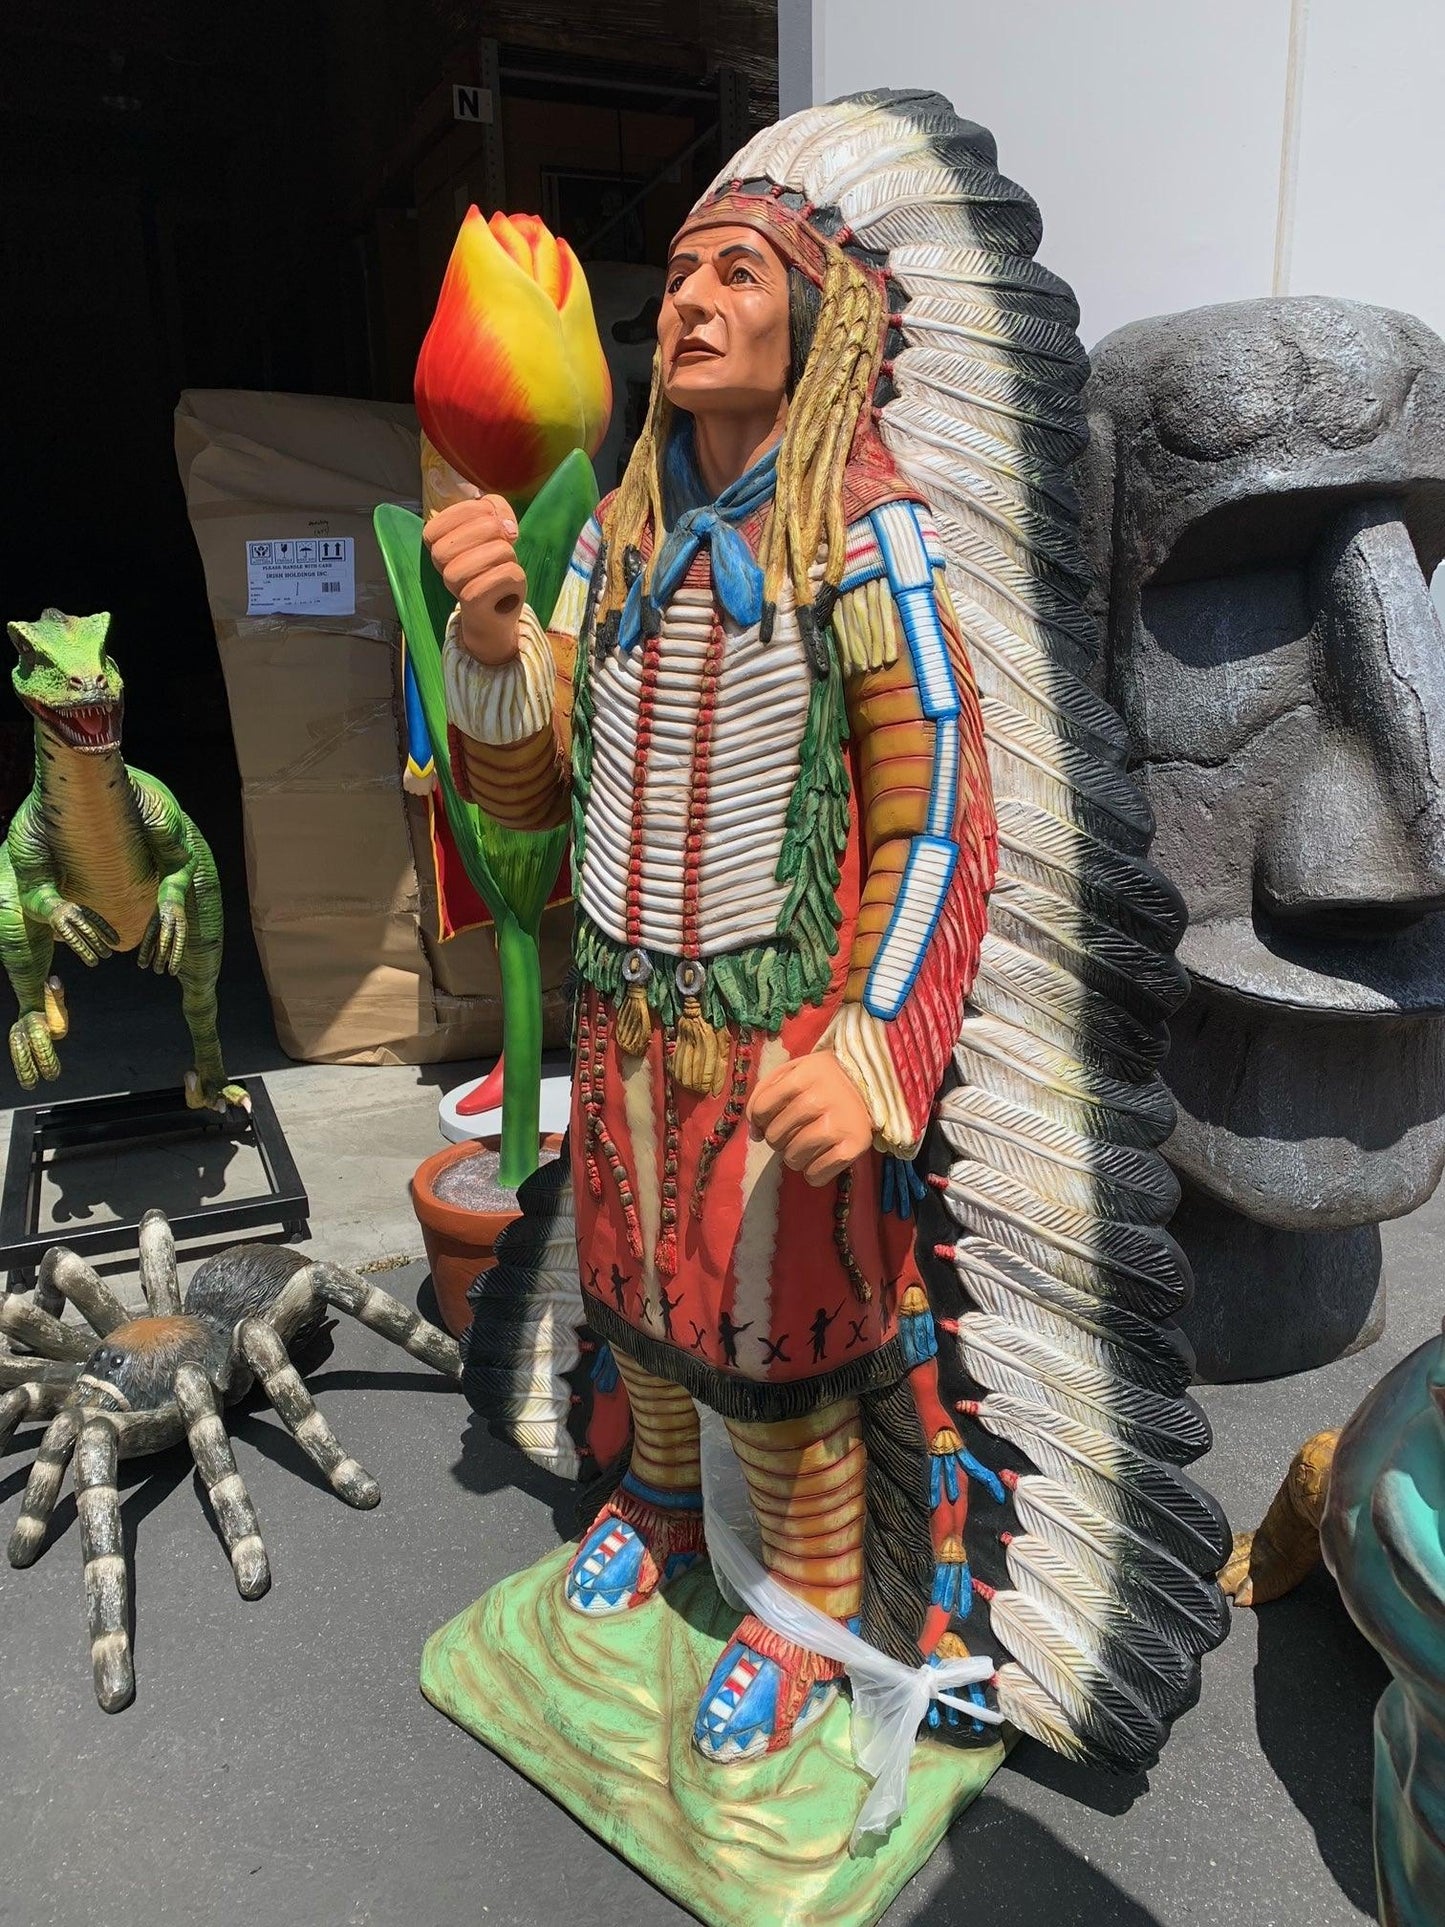 Indian With Spear Statue - LM Treasures Prop Rentals 